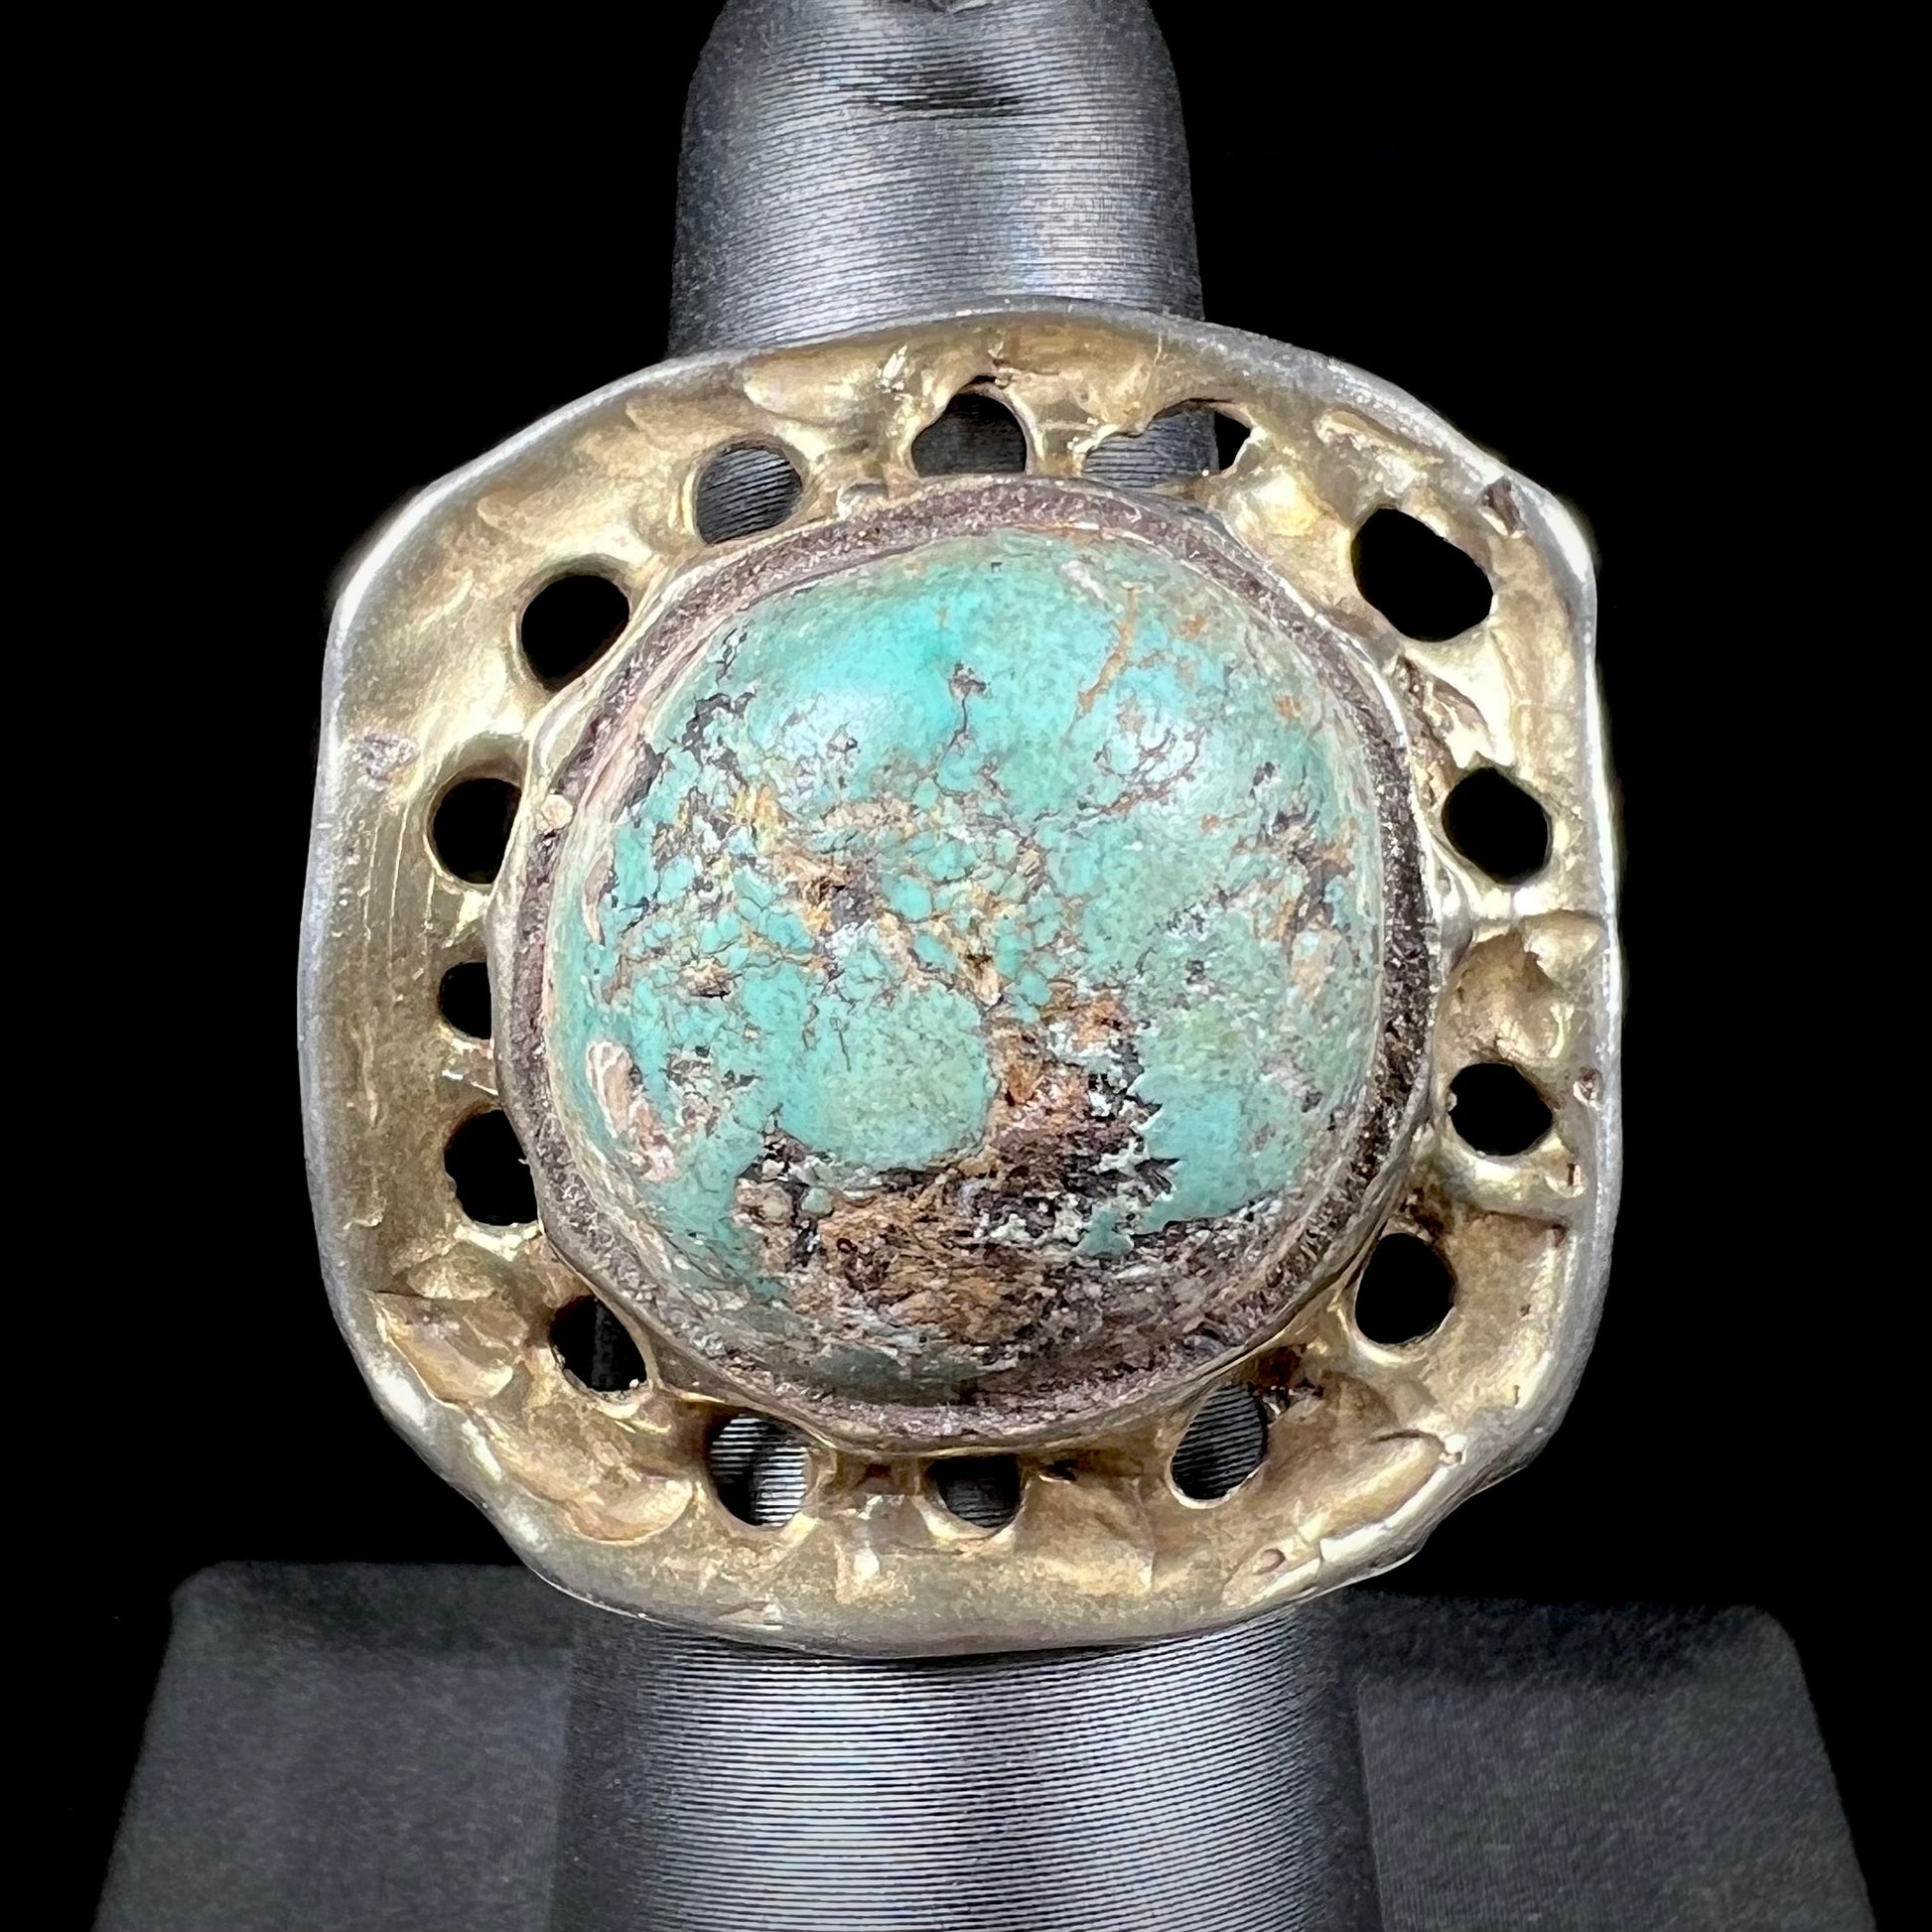 A unisex sterling silver ring with a gold wash, set with a natural, unstabilized Valley Blue turquoise stone.